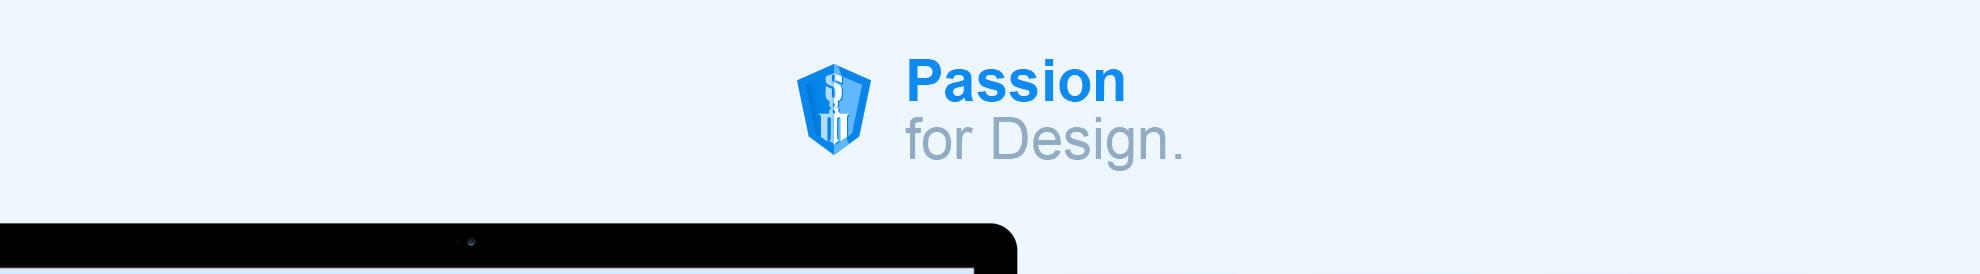 sherwin-passion for design-1